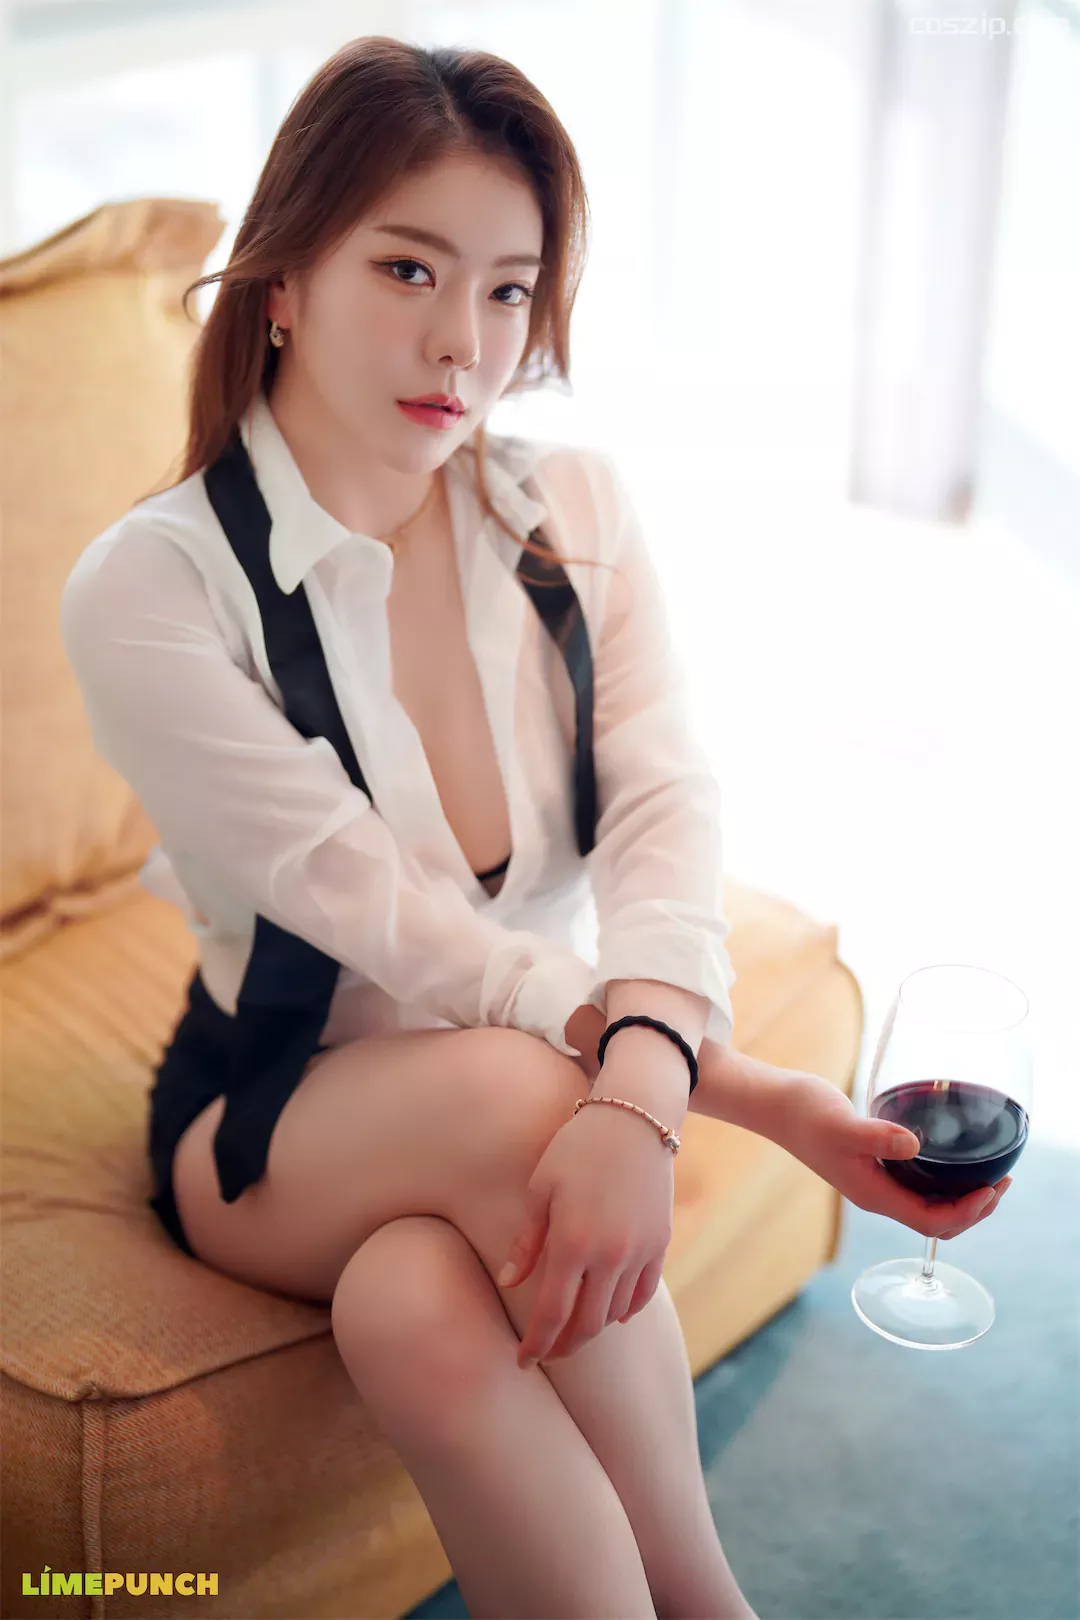 LimePunch-Jungmi-Vol.1-Relaxation-coszip.com-019